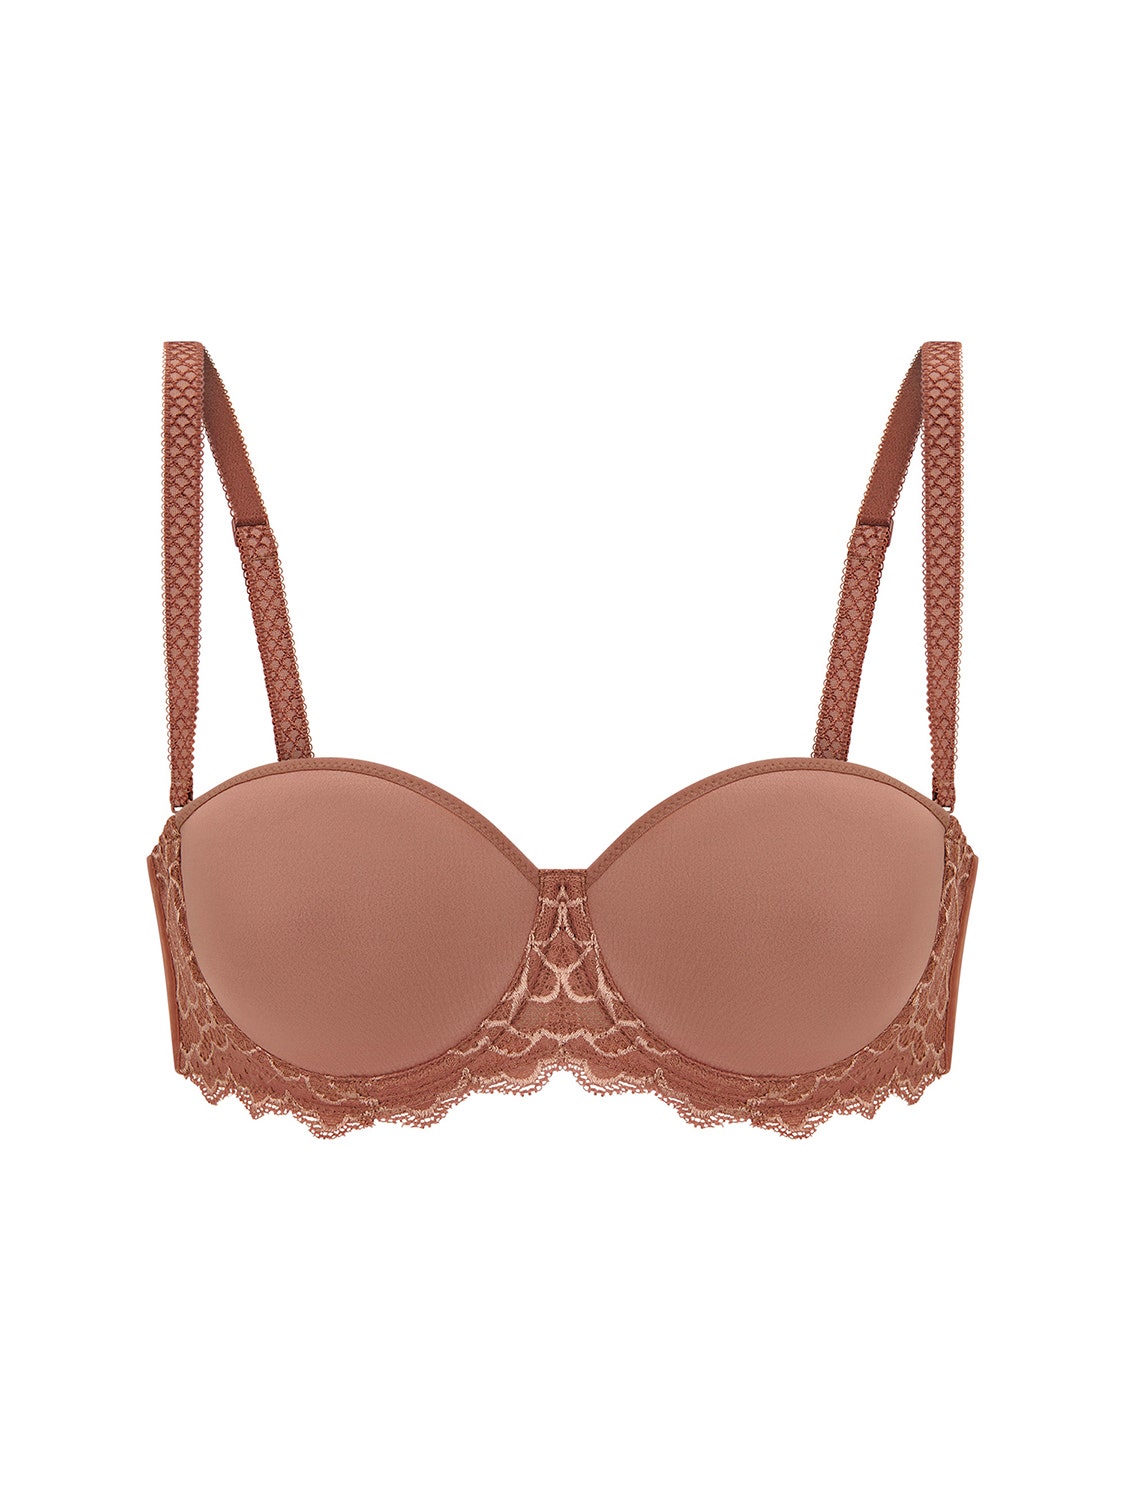 Simone Perele 12v Karma STRAPLESS PLUNGE BRA PEAU ROSE buy for the best  price CAD$ 130.00 - Canada and U.S. delivery – Bralissimo